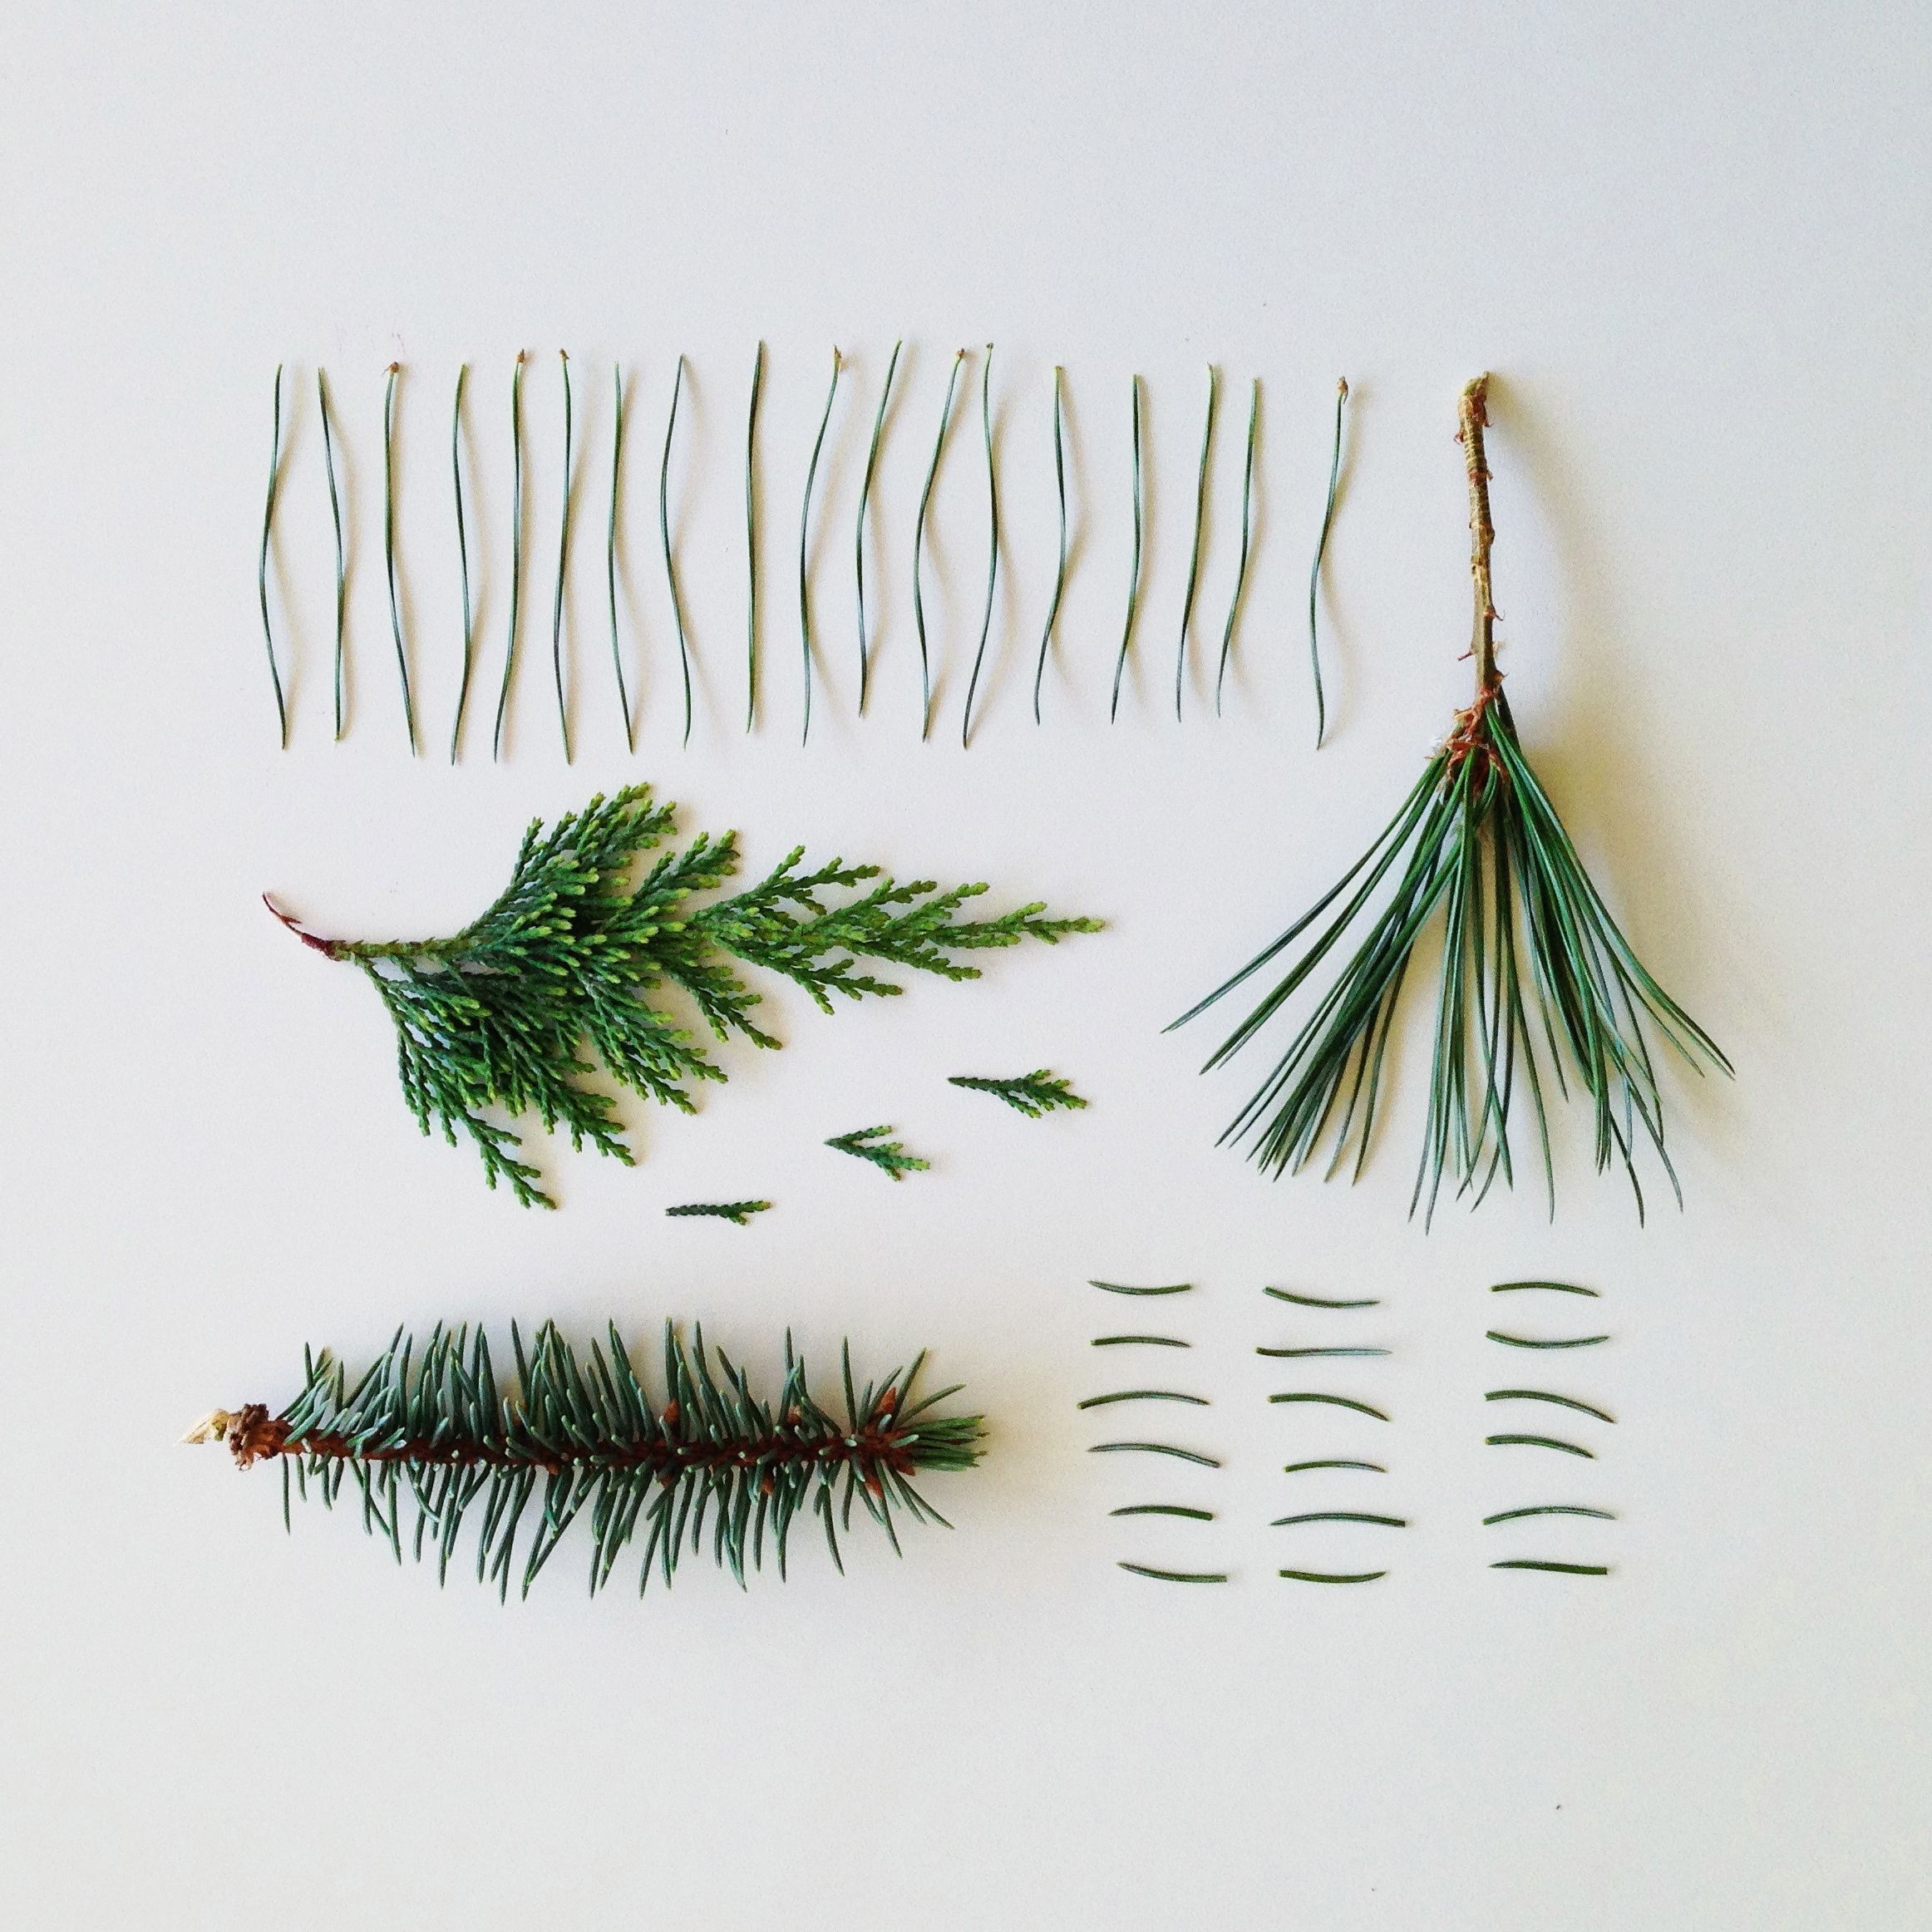 Identify Coniferous Trees by Examining Their Needles